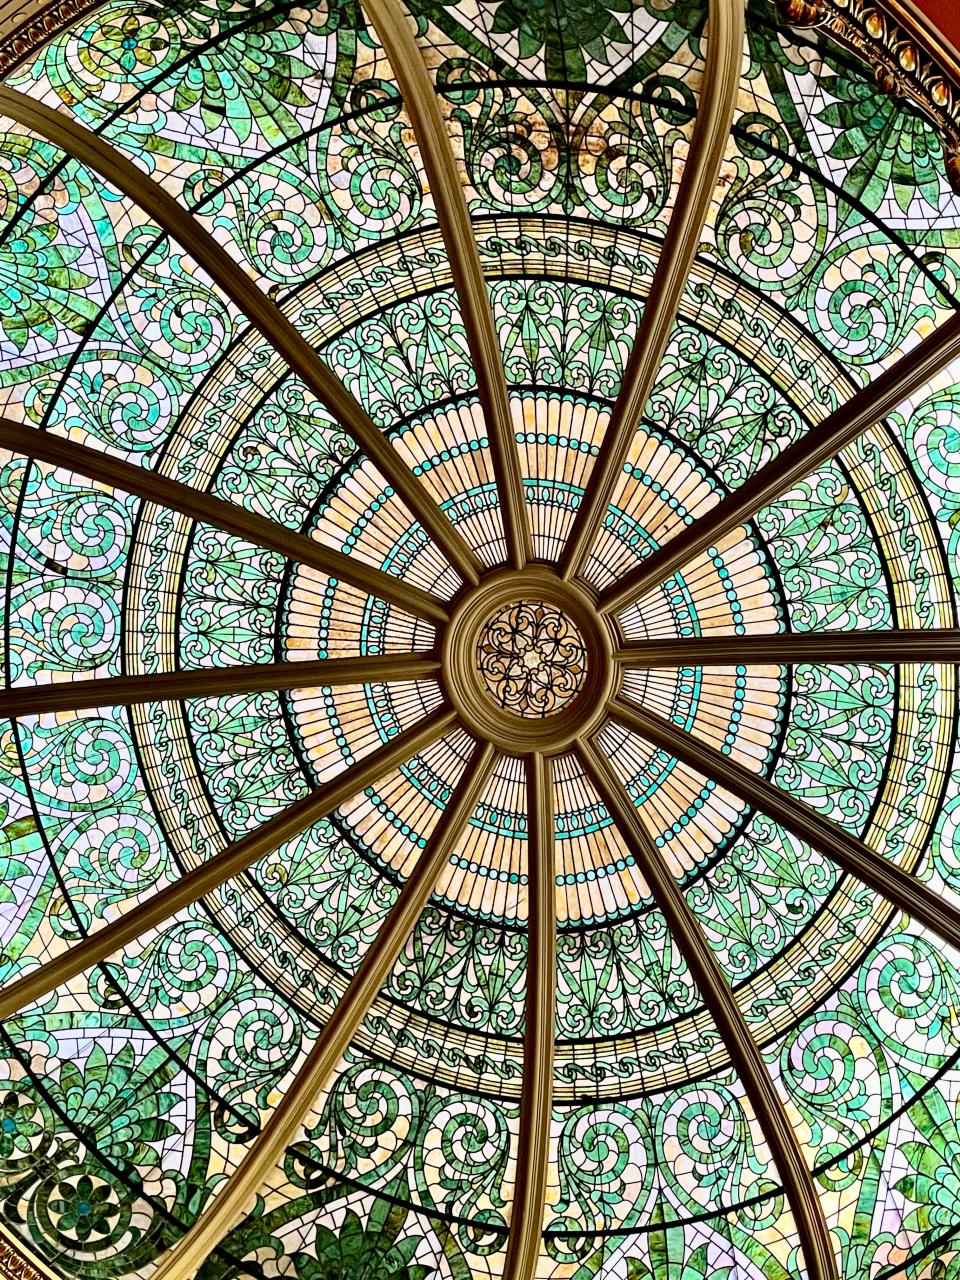 The intricate stained-glass dome in the Supreme Court Chamber is a work of art in itself.